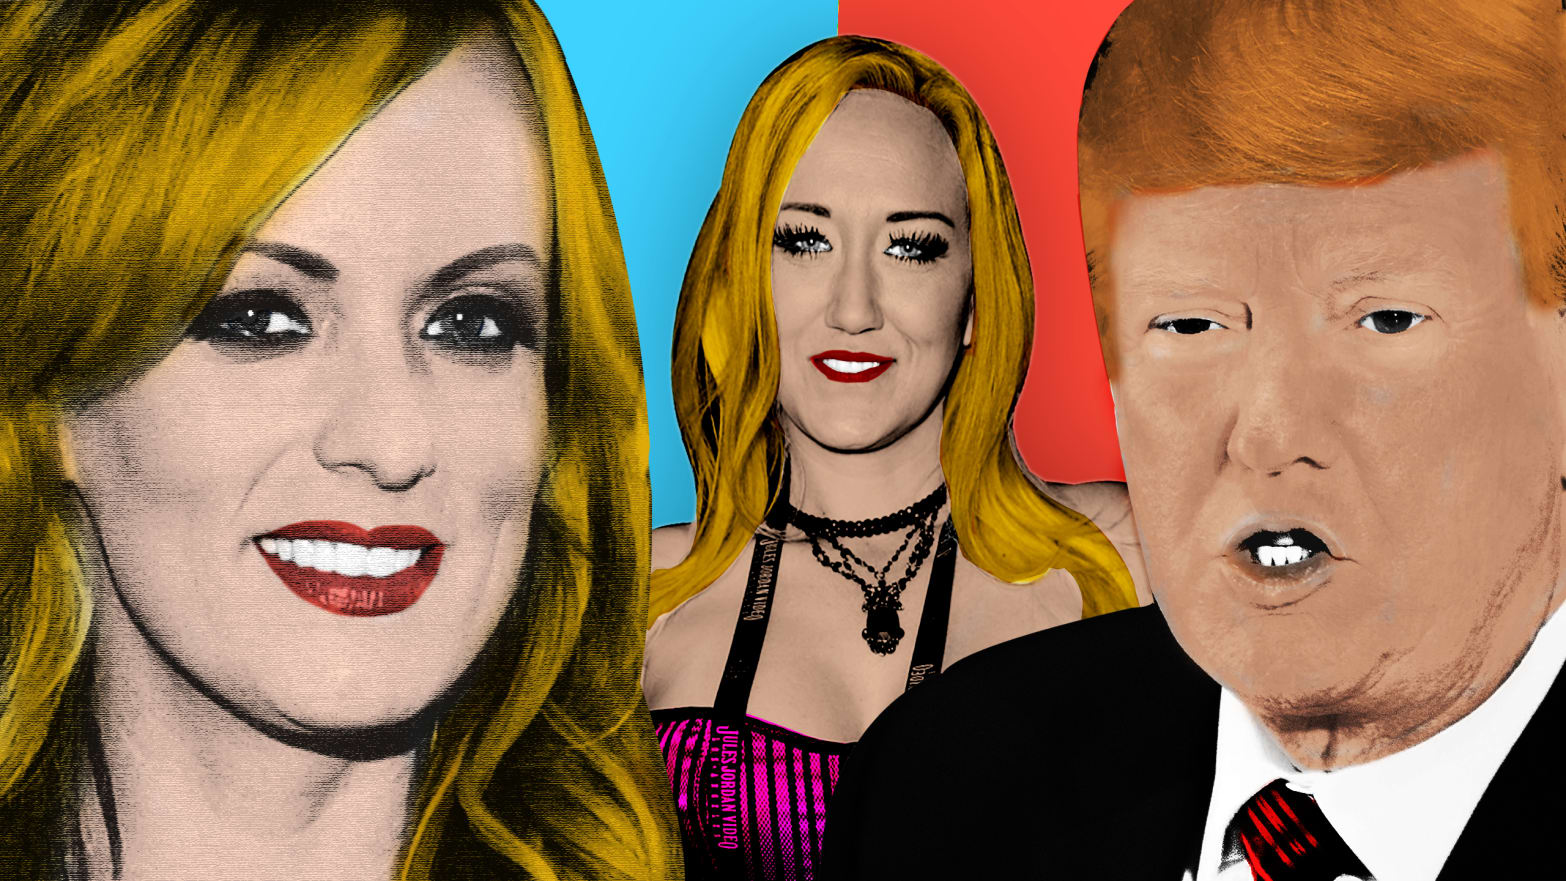 The Other Woman in the Stormy Daniels-Trump Saga: 'He Knows What He's Done'